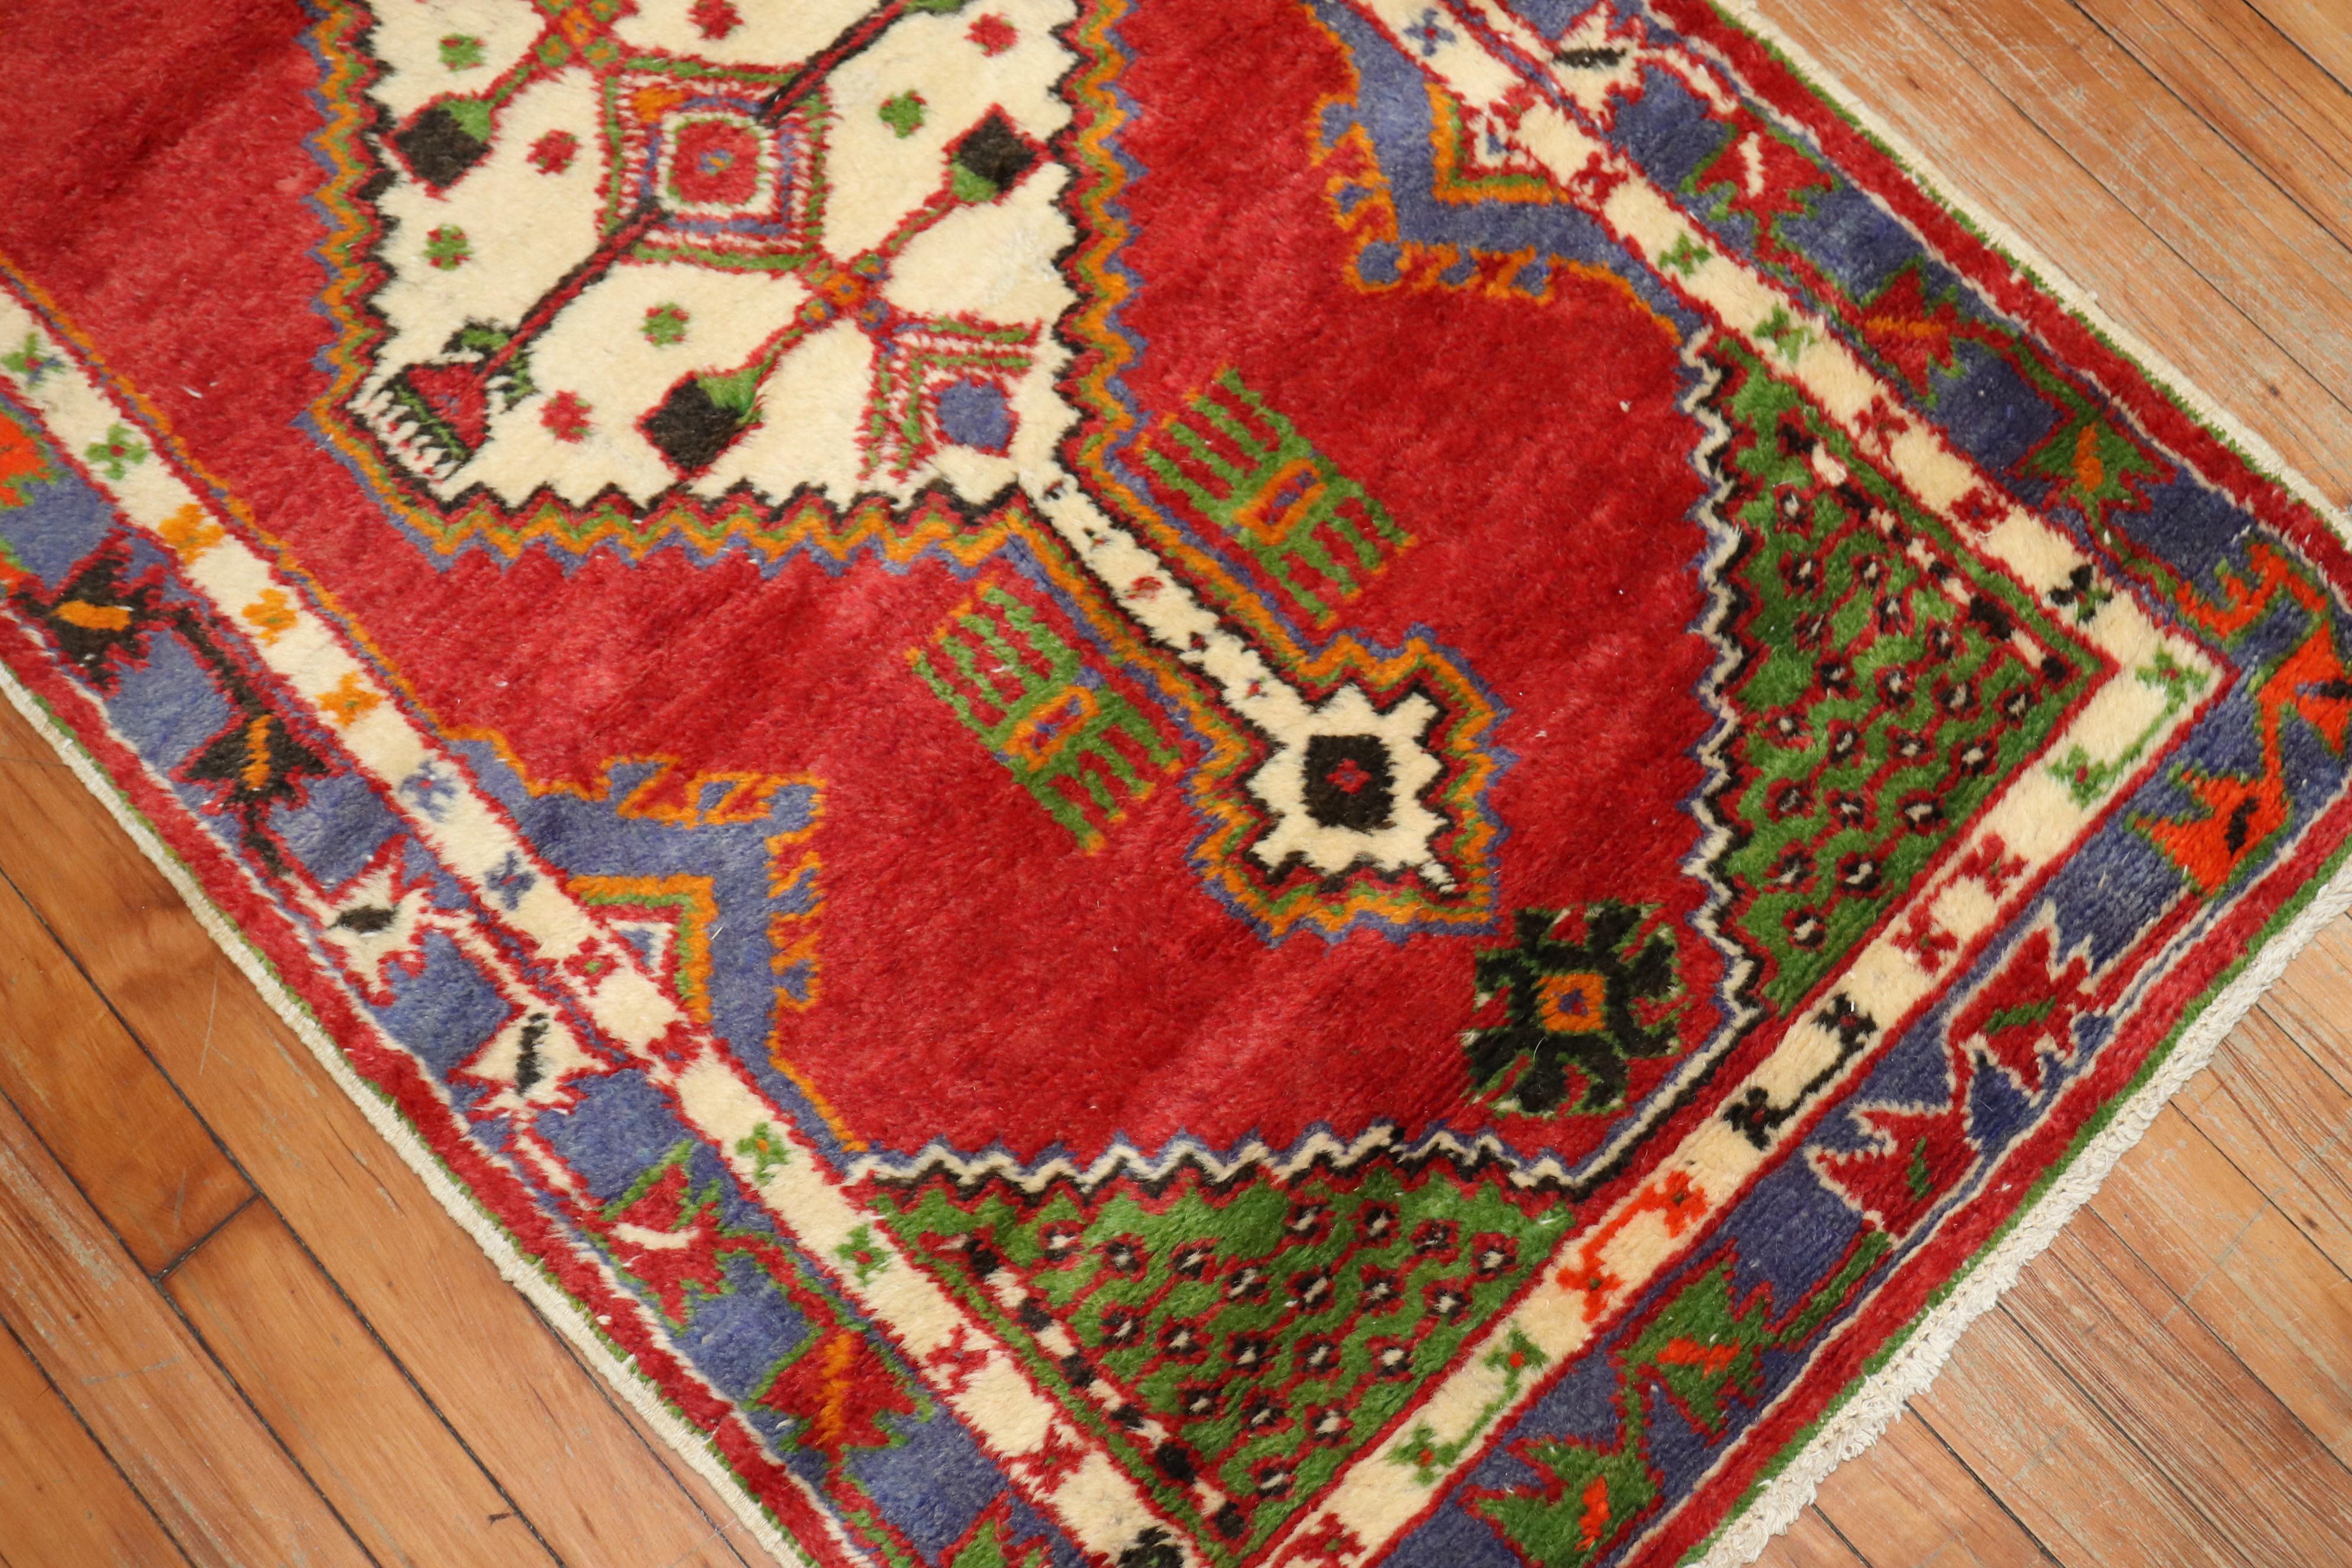 A one of a kind vintage colorful Turkish Oushak decorative throw rug.

Size: 2'8